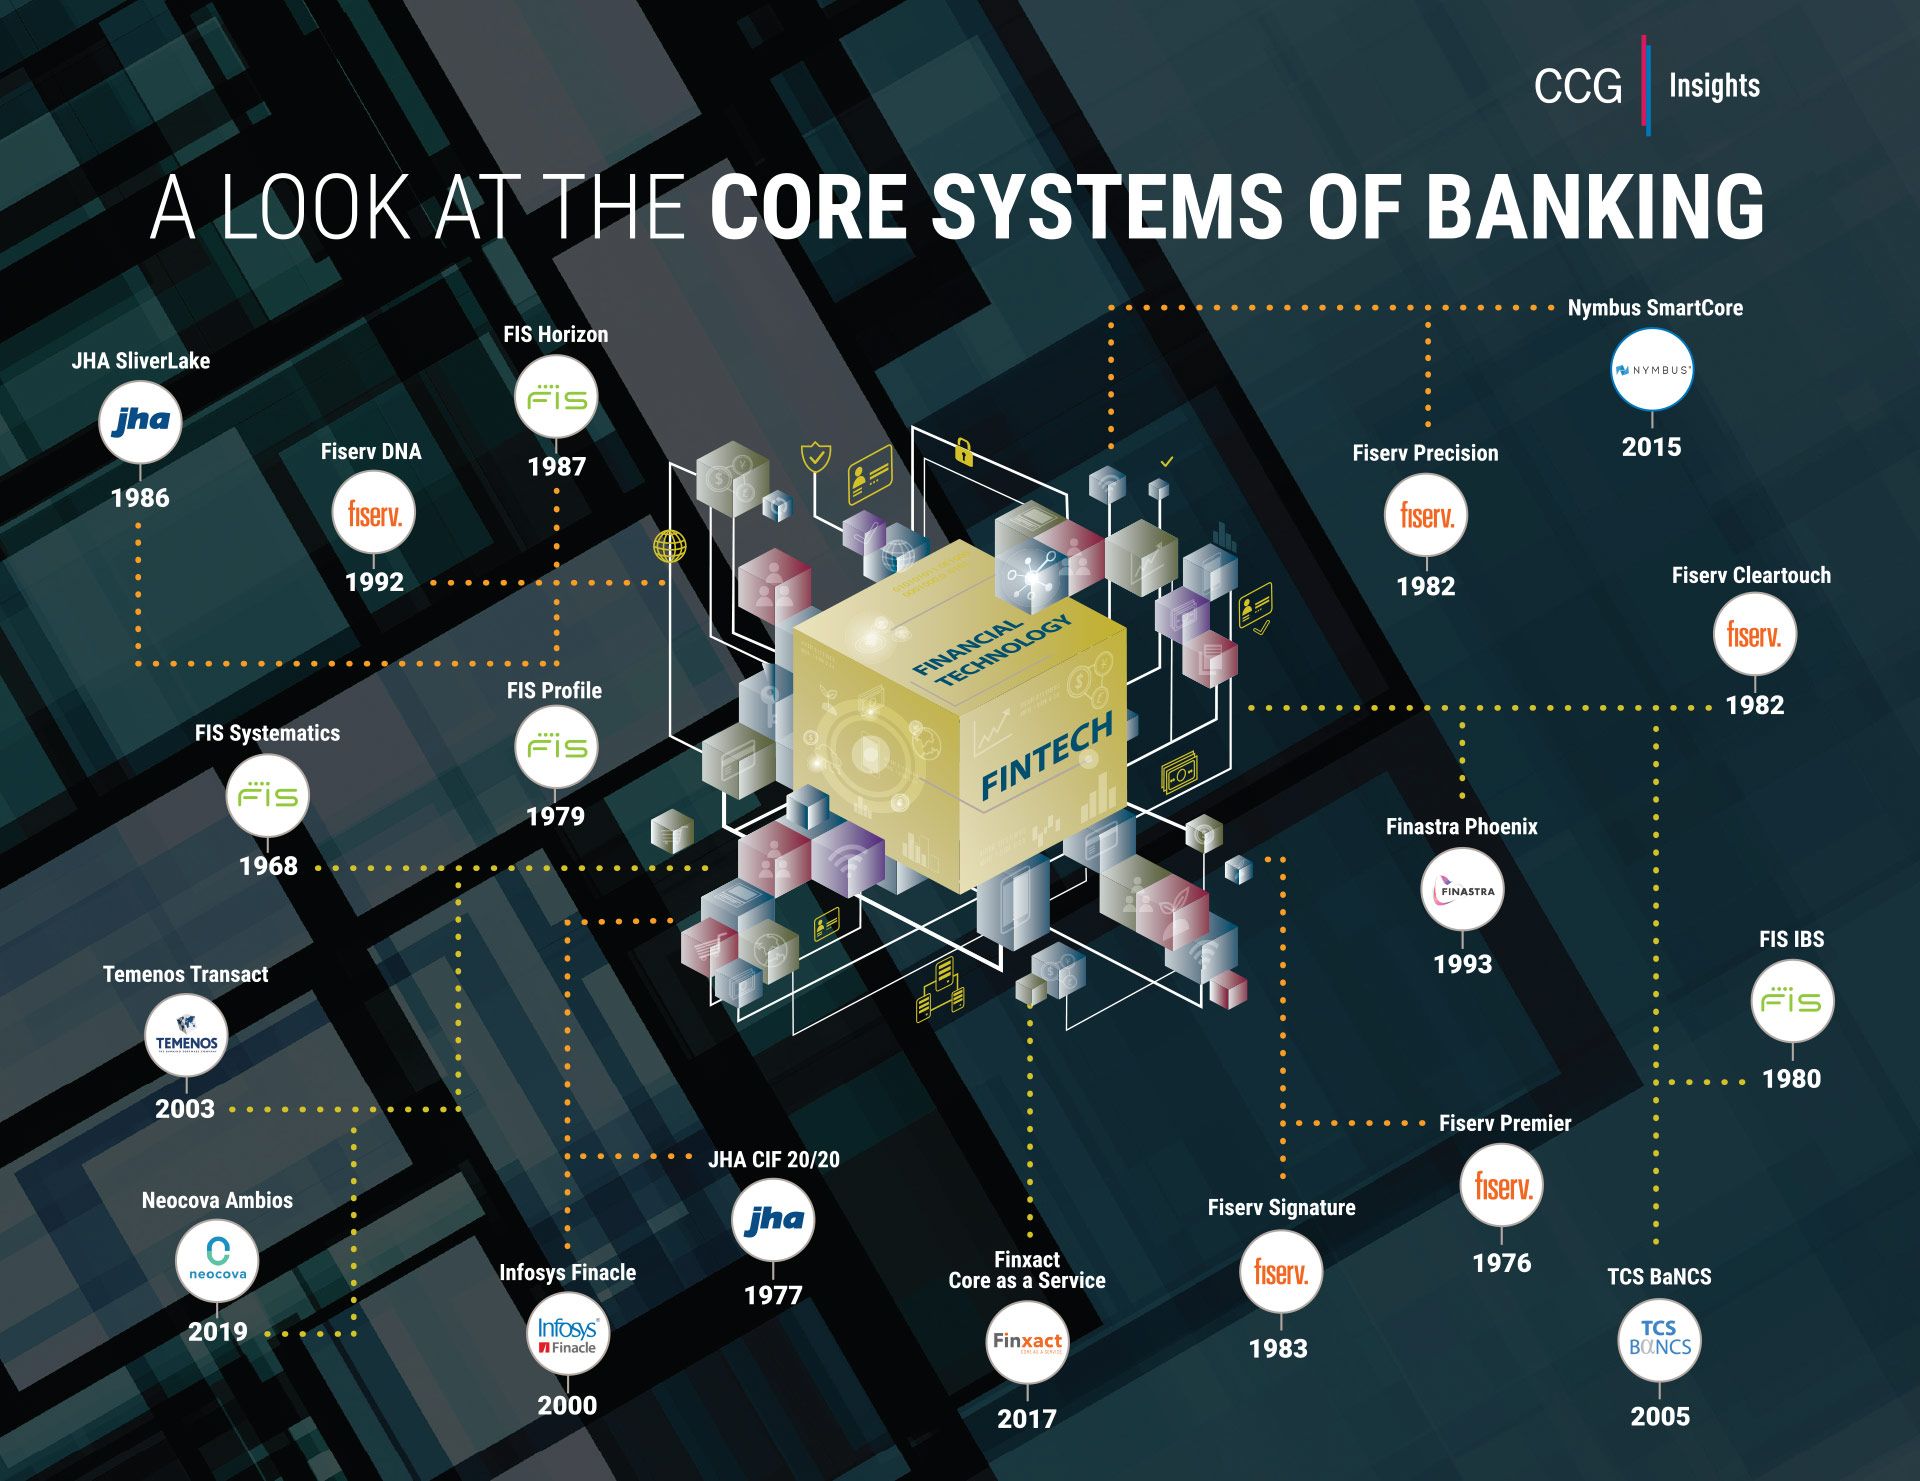 A Look at the Core Systems of Banking from CCG Insights